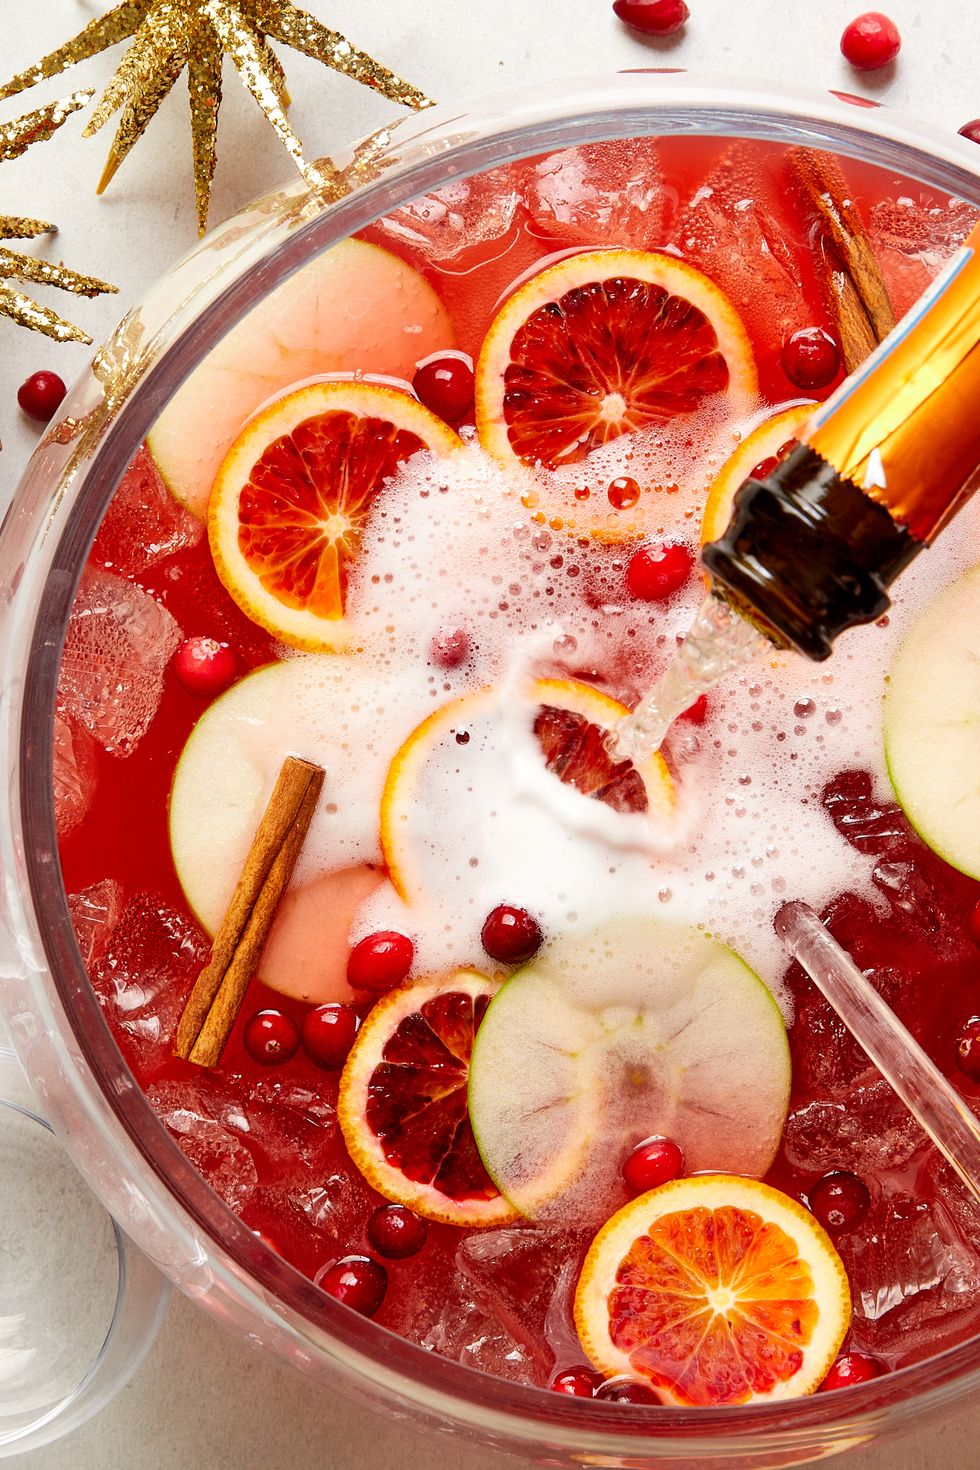 Homemade Cranberry Juice - Champagne Tastes®